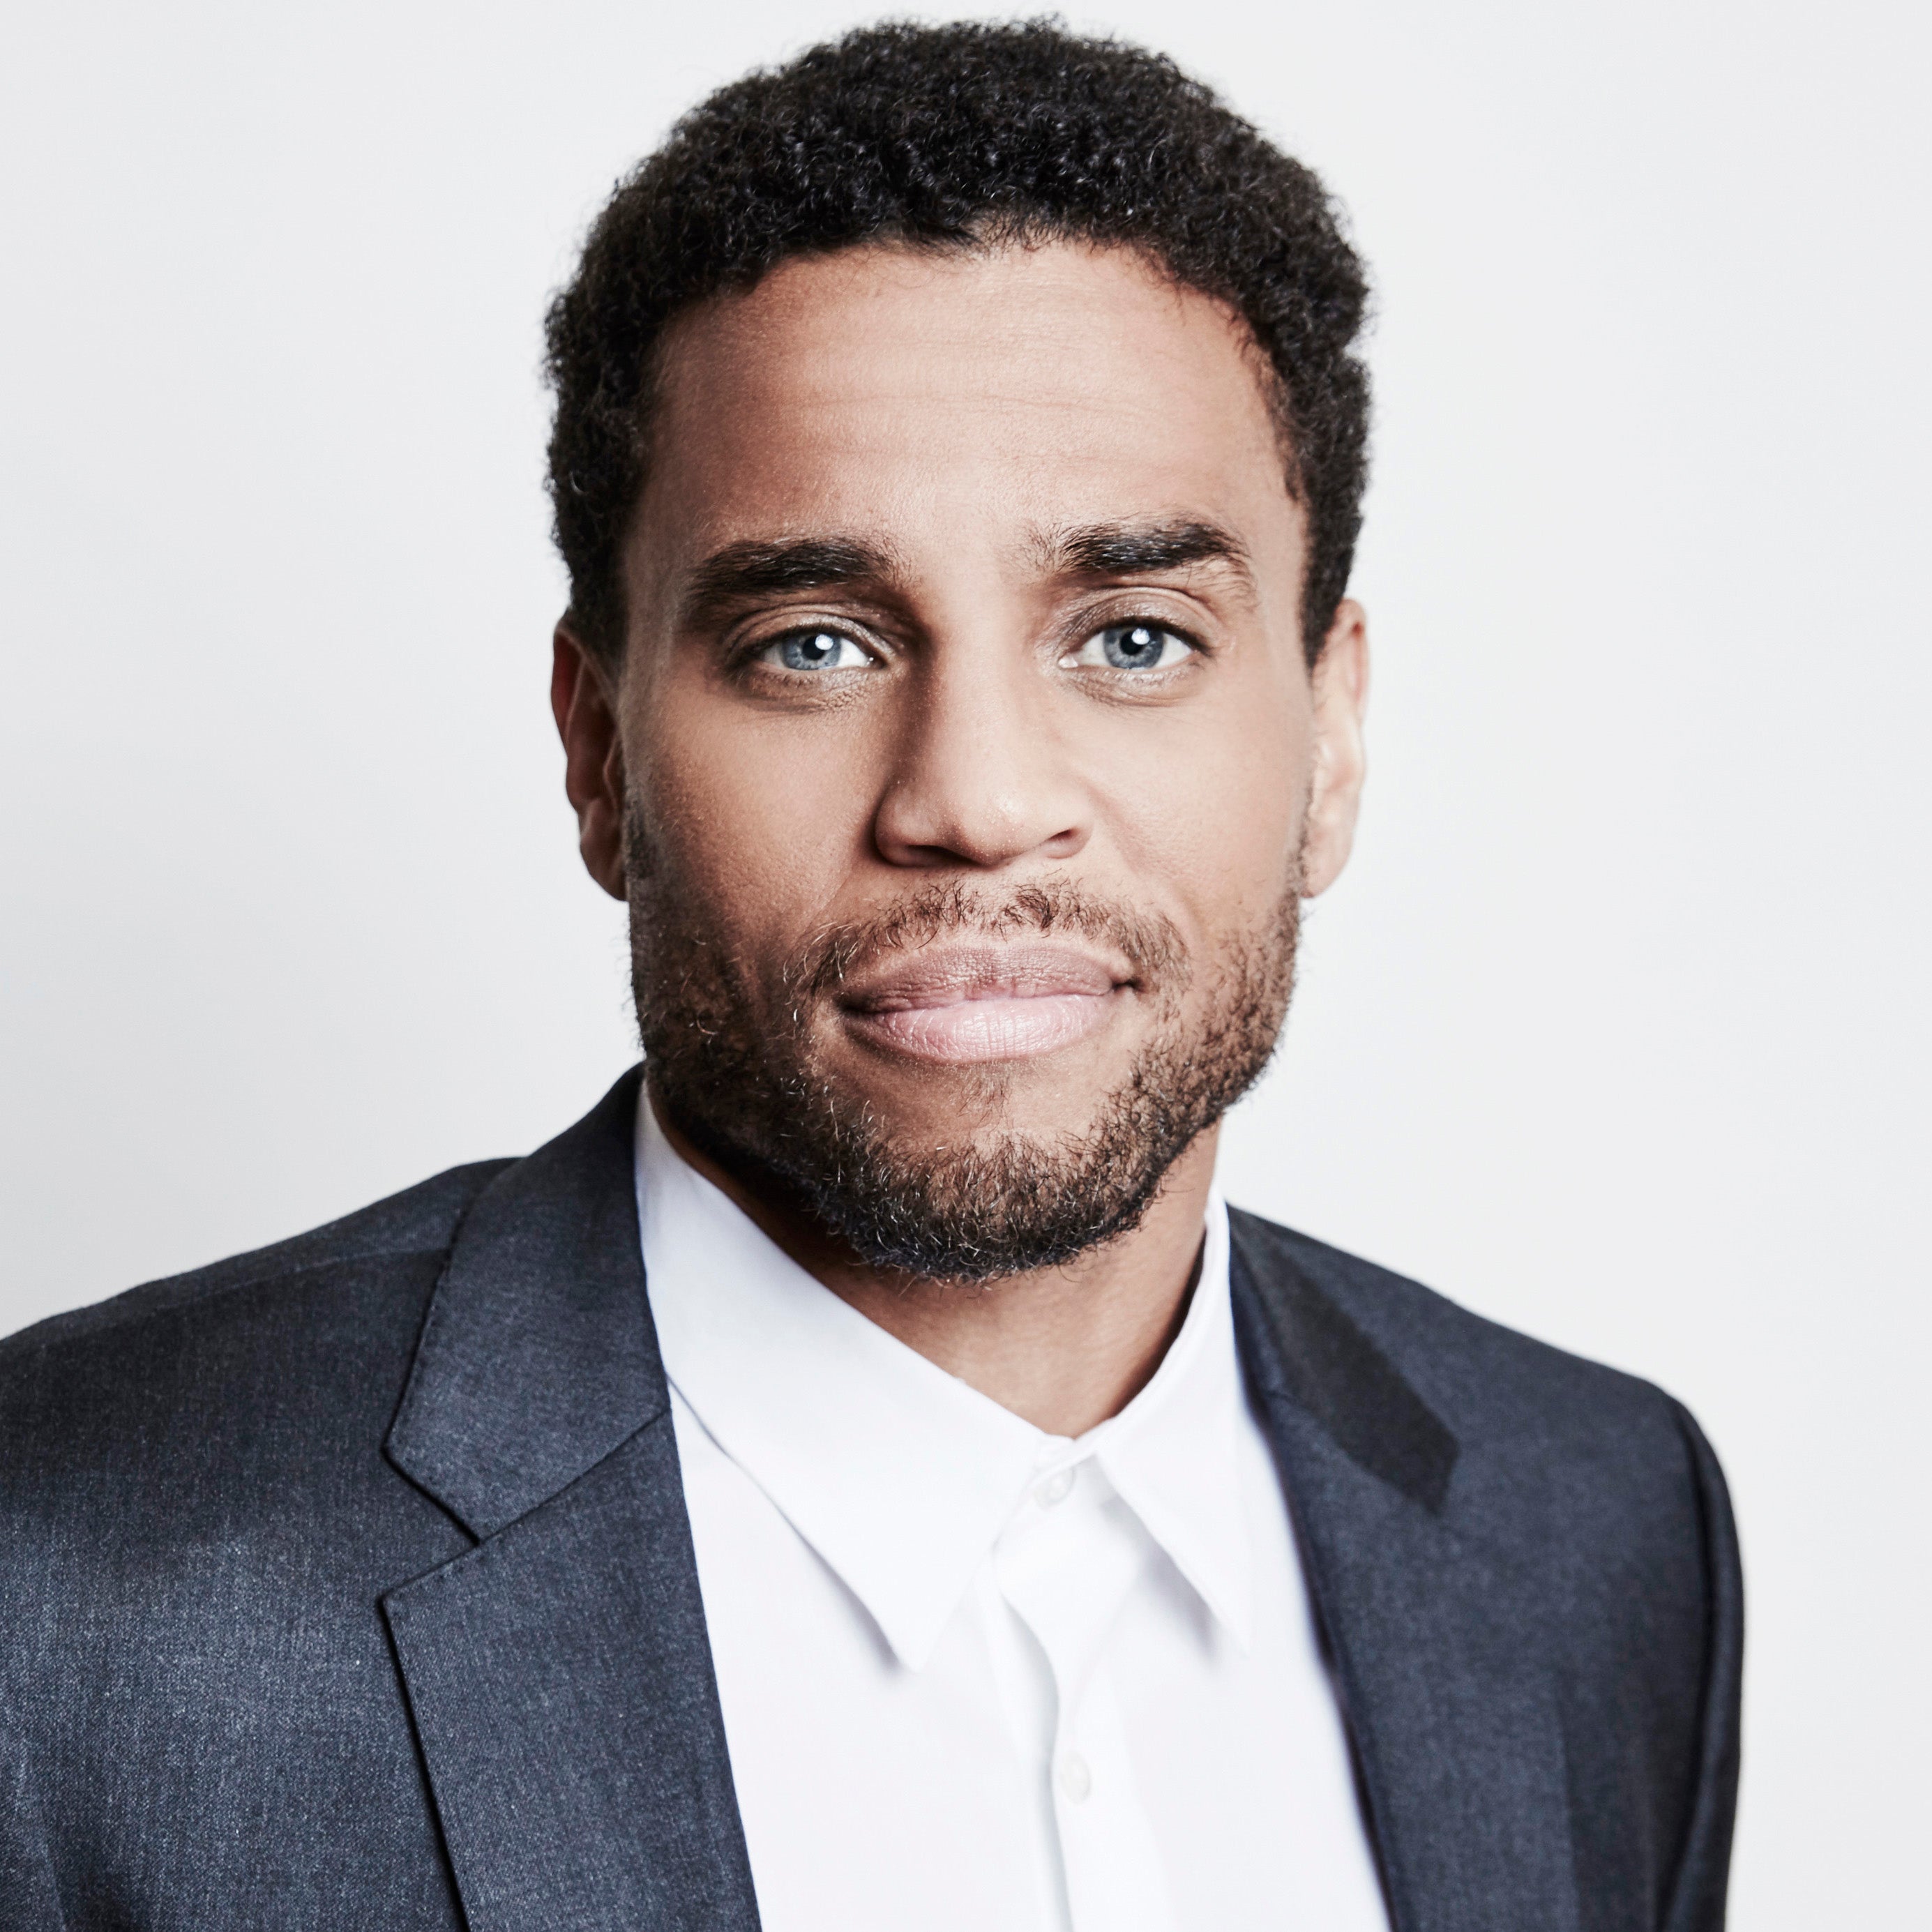 Michael Ealy Shares Photo Of His Wife For #NoMuslimBan